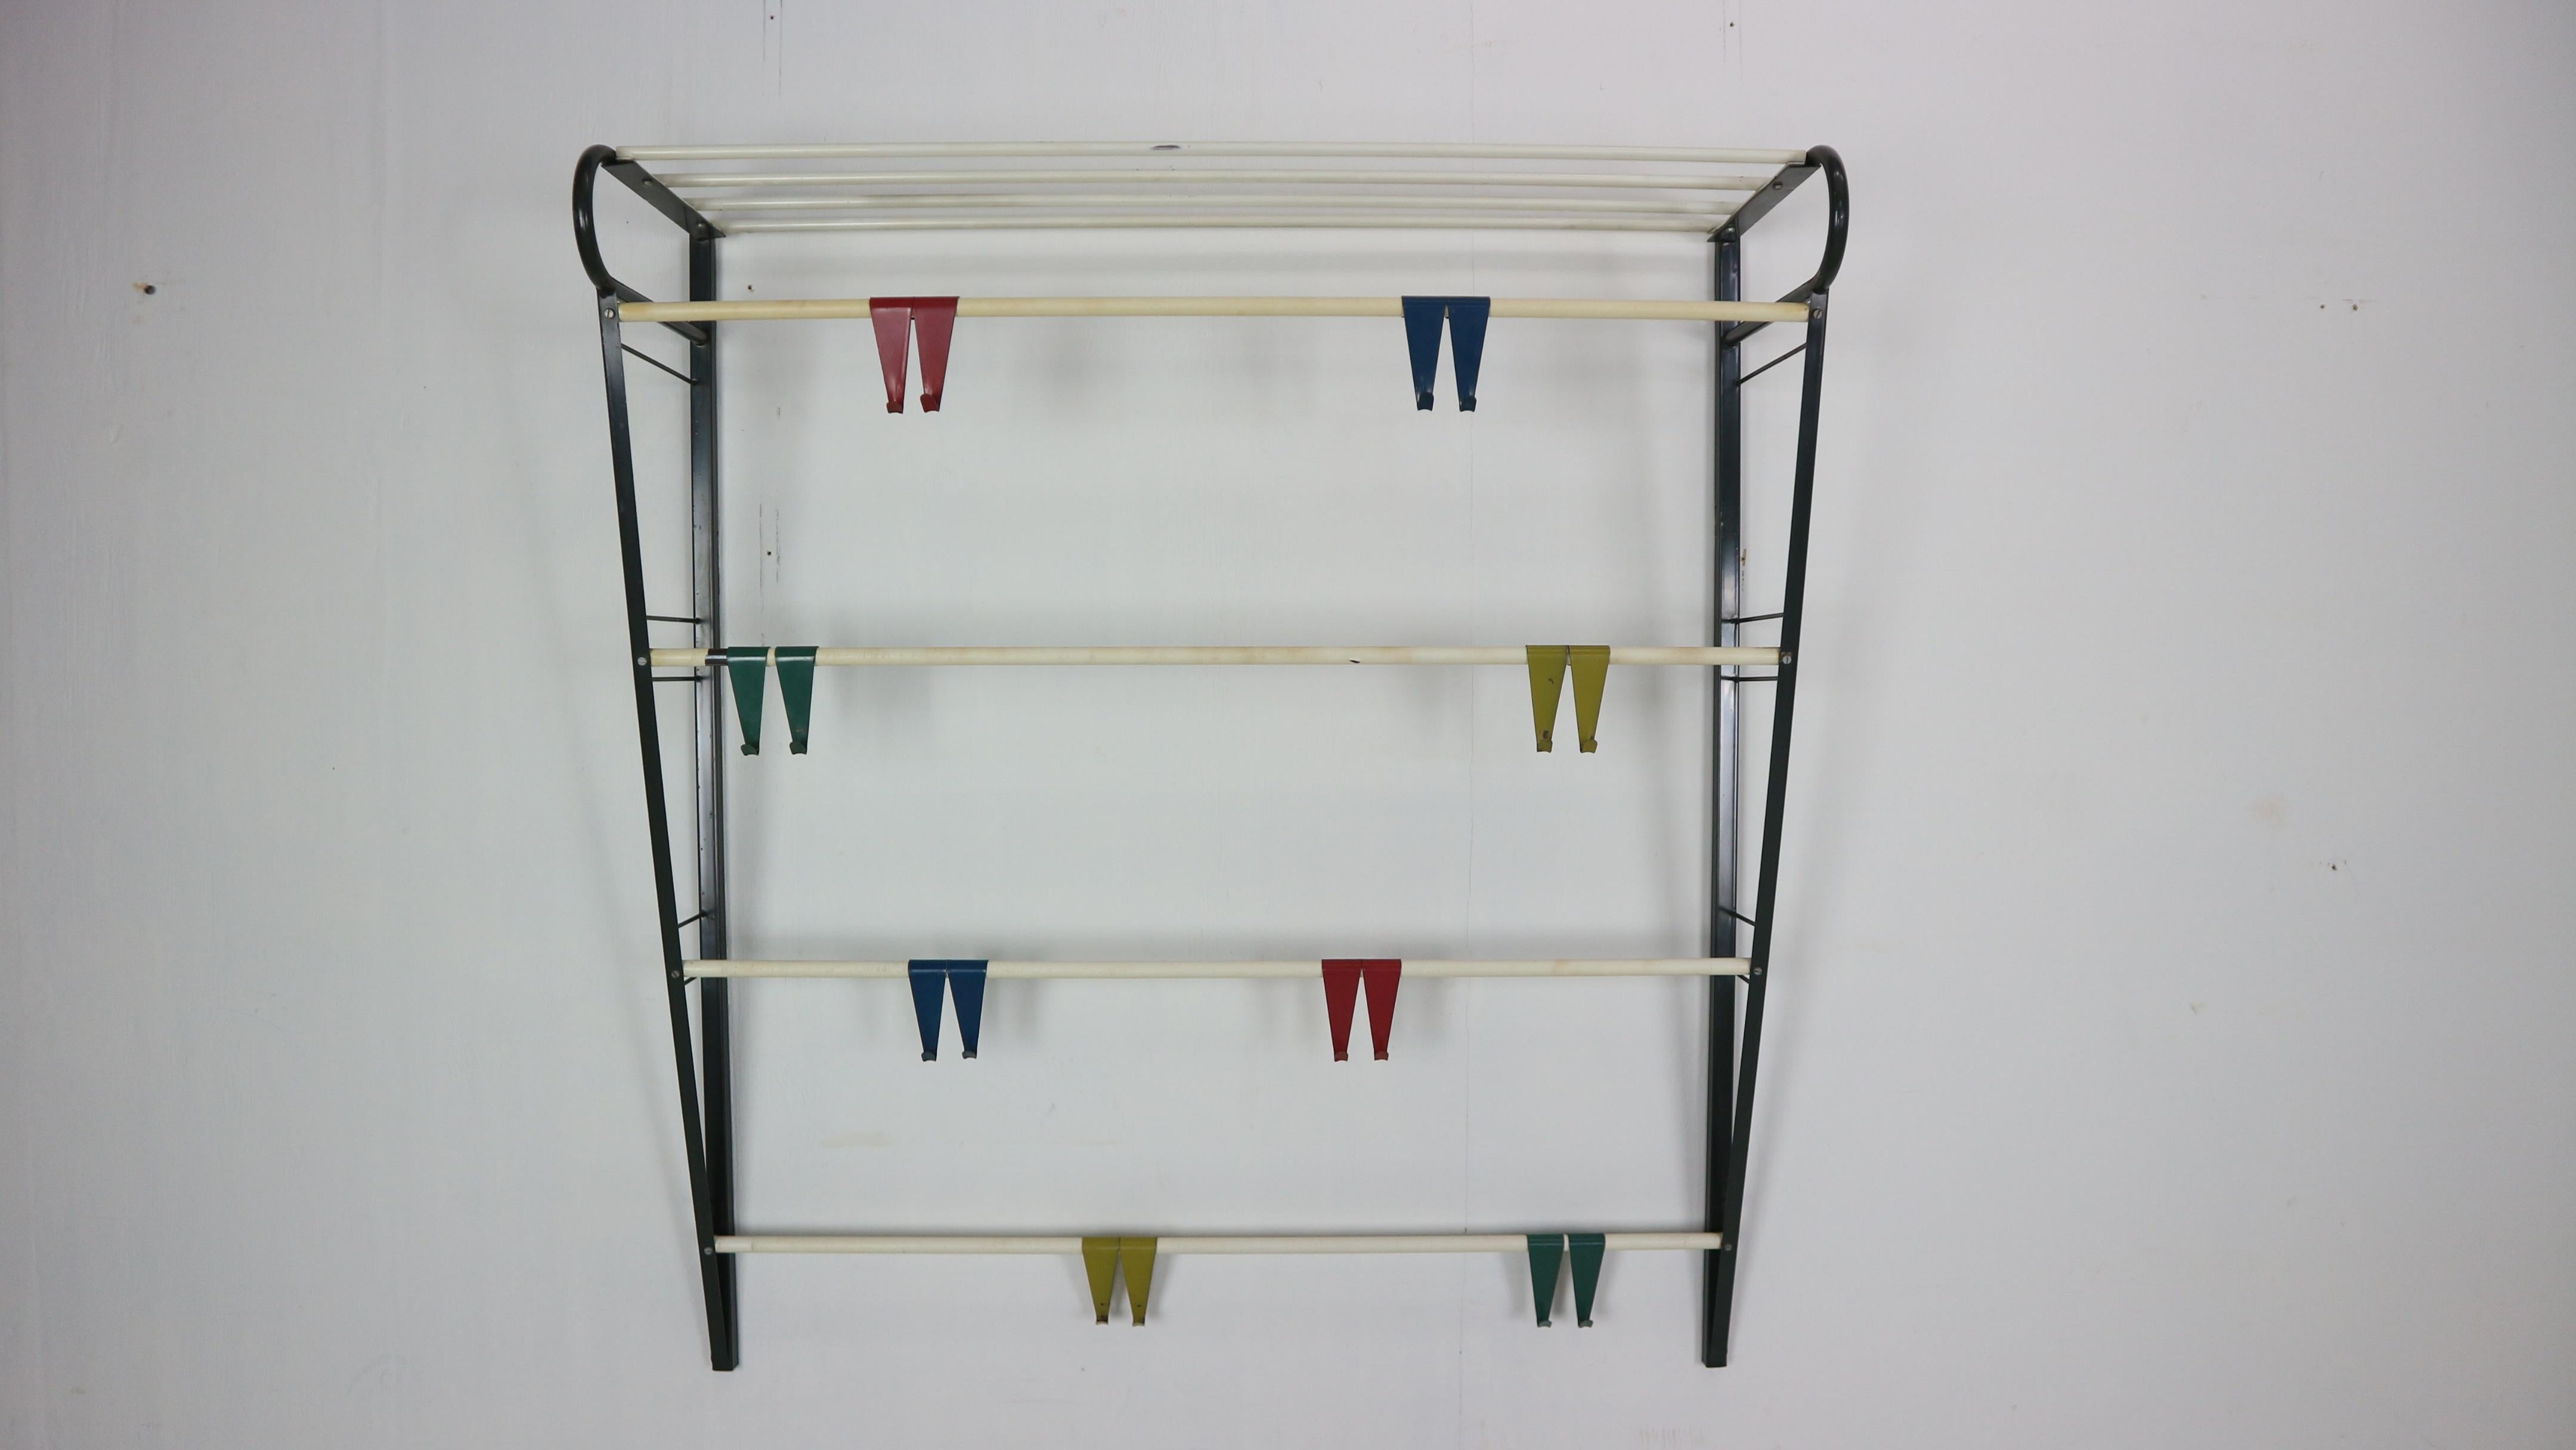 Vintage coat& hat rack designed by the Dutch designer Coen de Vries in the 1950s and manufactured by Devo in the Netherlands.
This coat rack is a rare first edition, embodying the timeless elegance and functionality of mid-century design. 

The coat